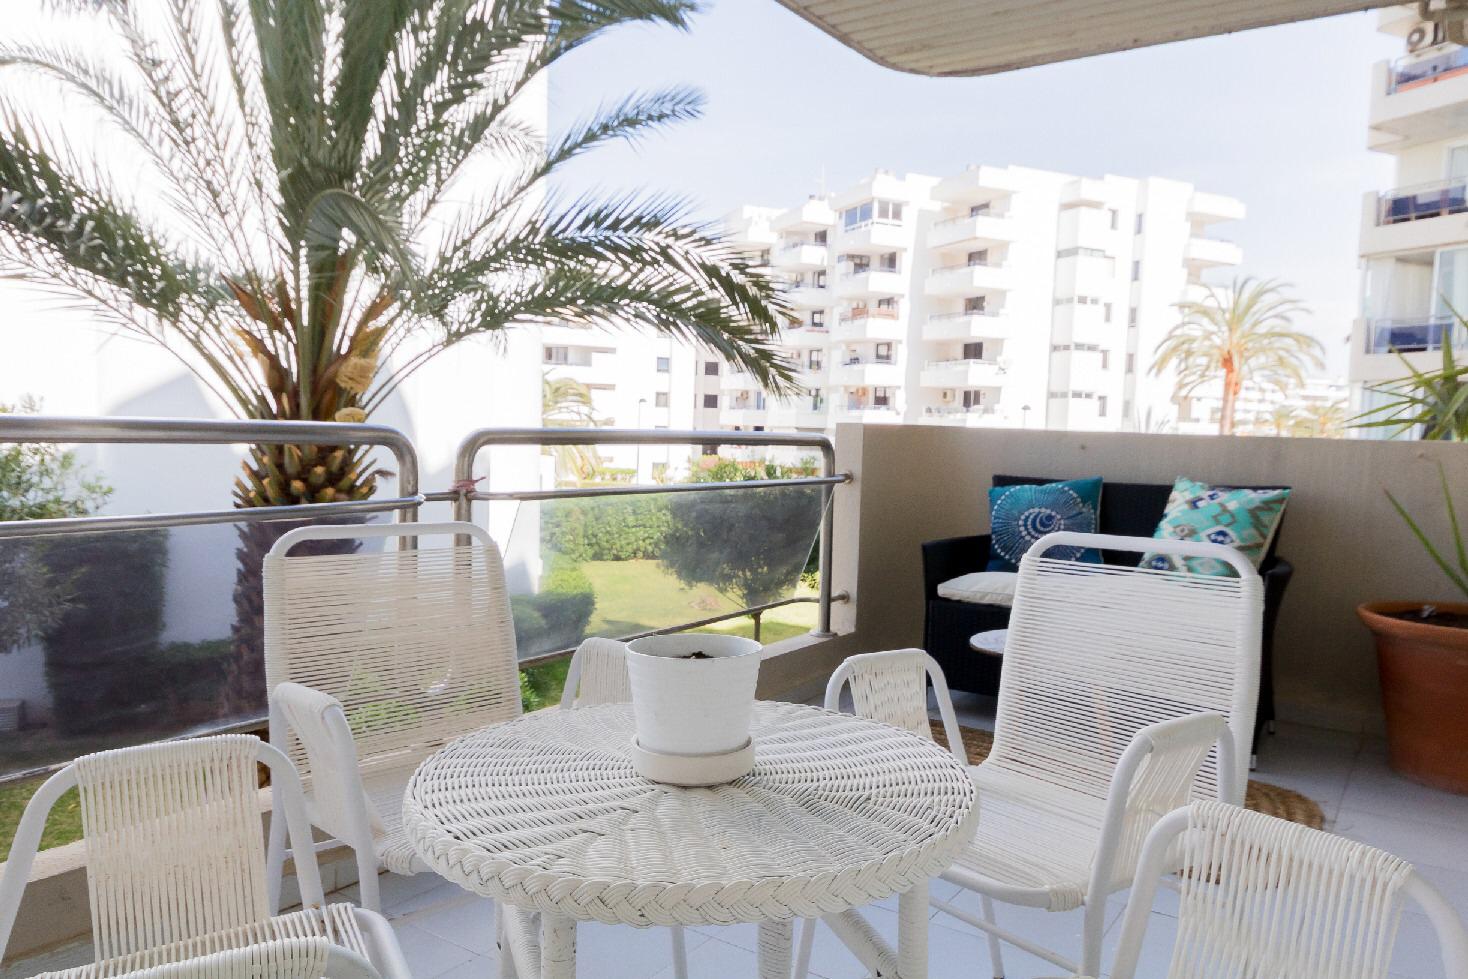 Nice apartment for sale in Marina Botafoch on Ibiza with large pool and nice views